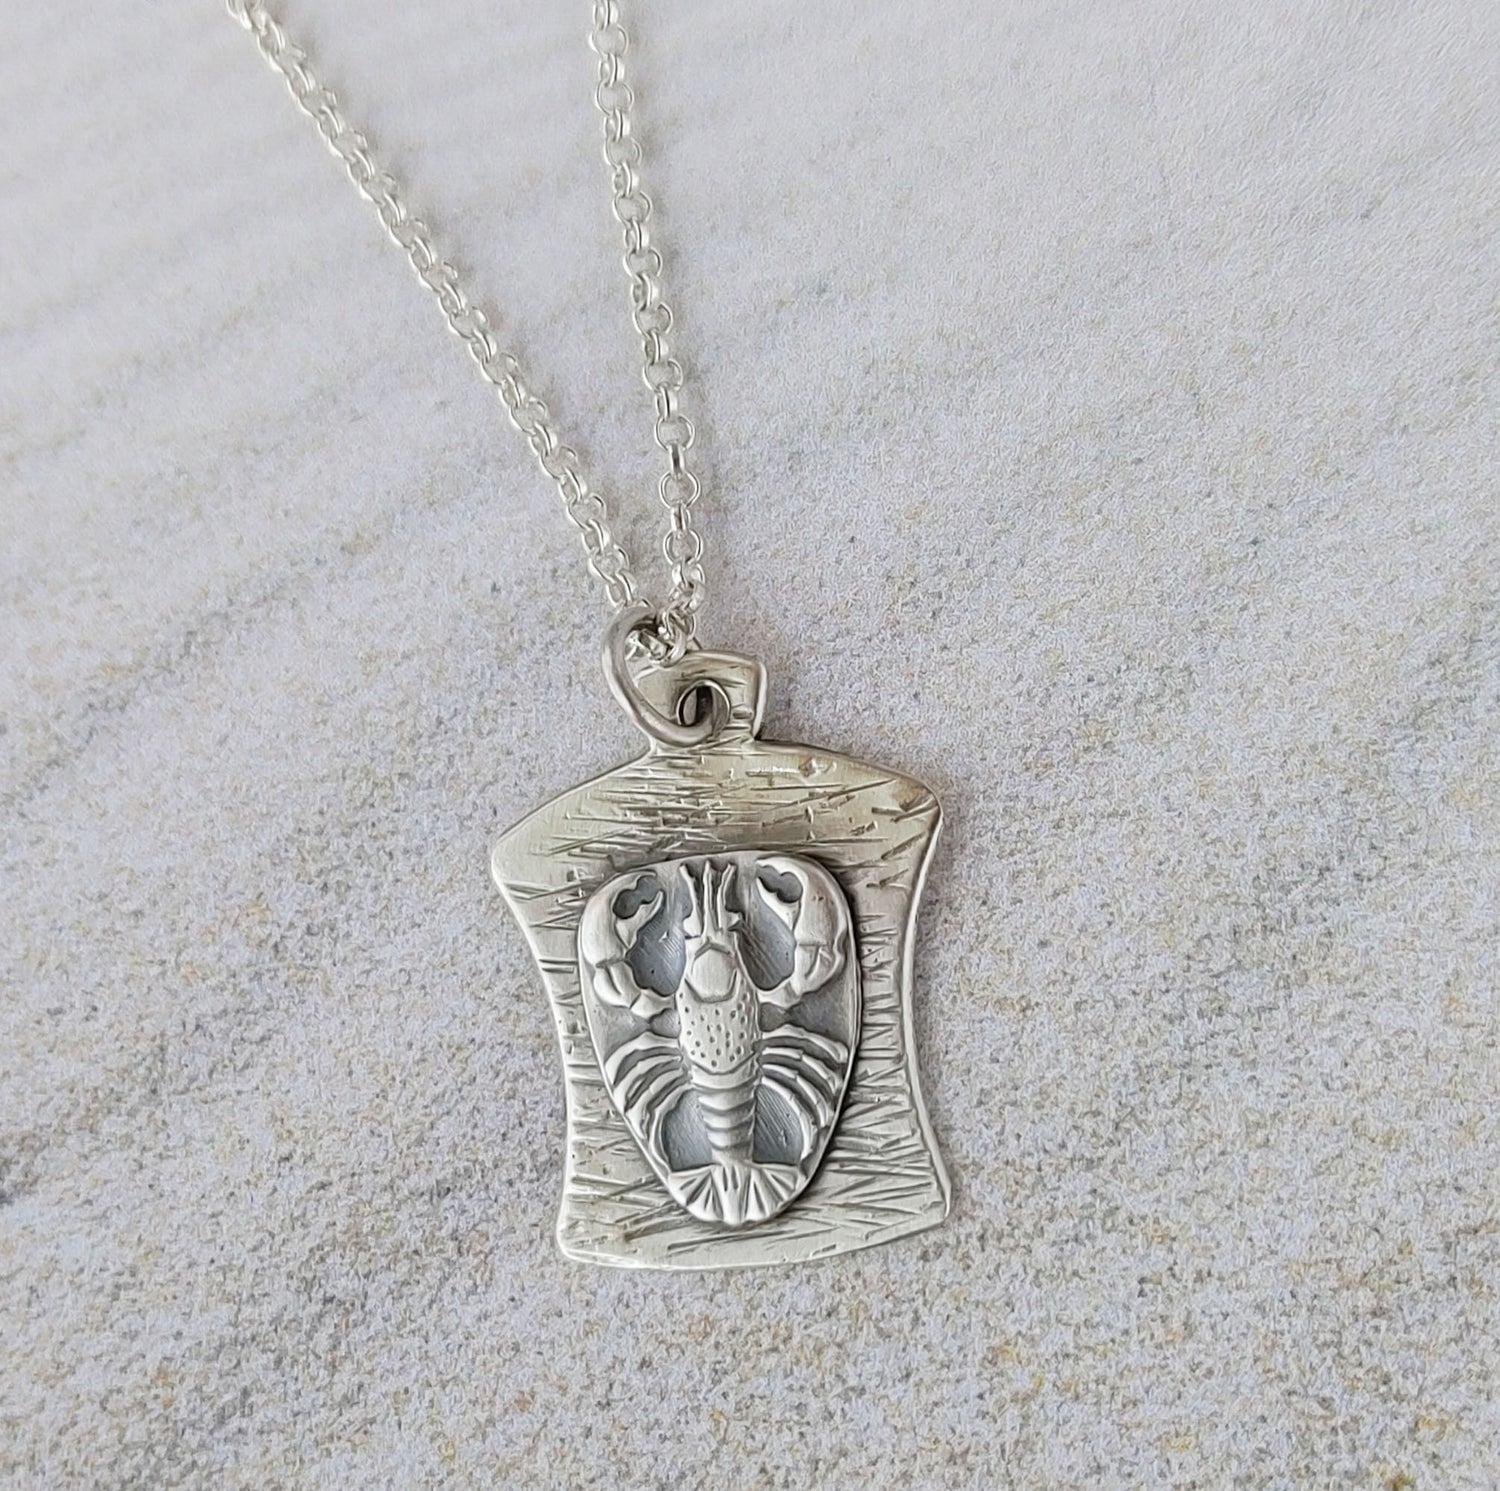 This pendant is a finely detailed raised lobster impression, the curved background has a hammered line texture.  This pendant is 1 inch long and about 3/4 inches across at the widest point. It comes on an 18 inch sterling silver chain.